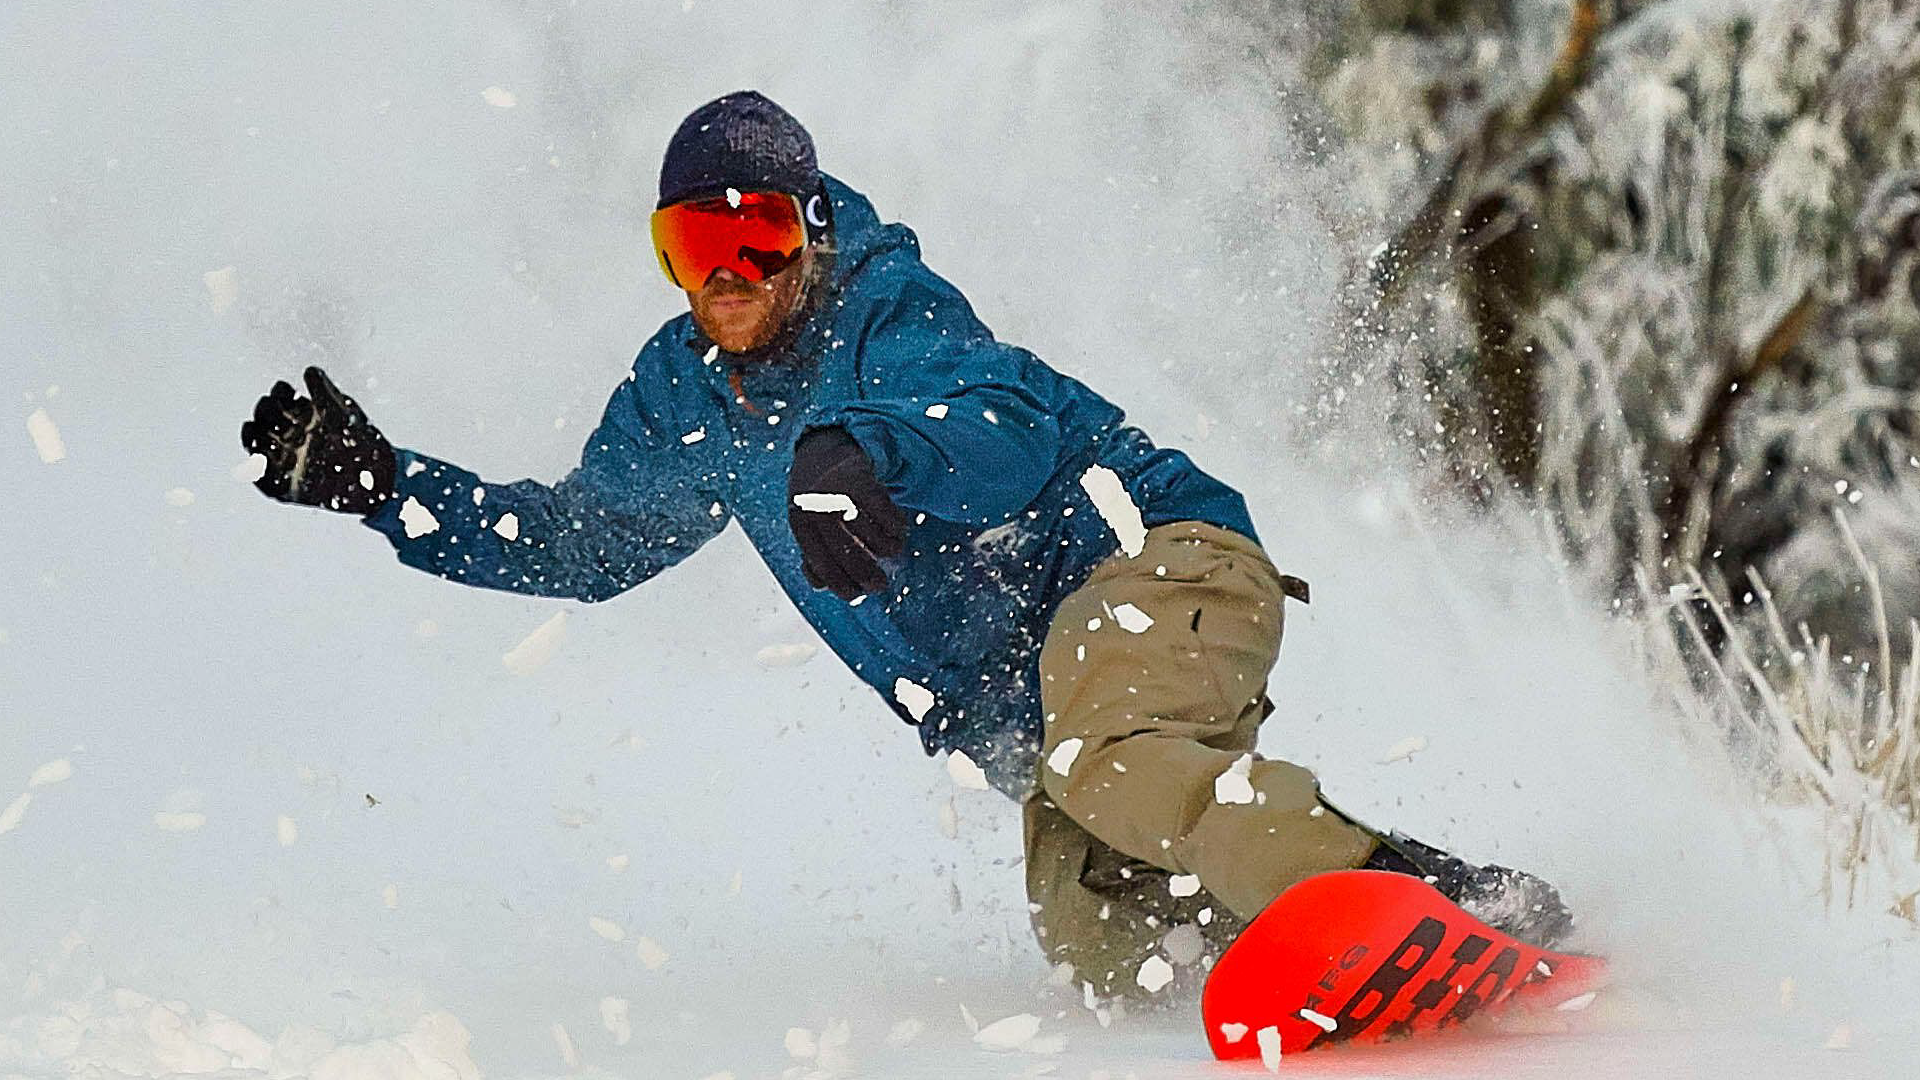 Robbie Walker making the most of the powder